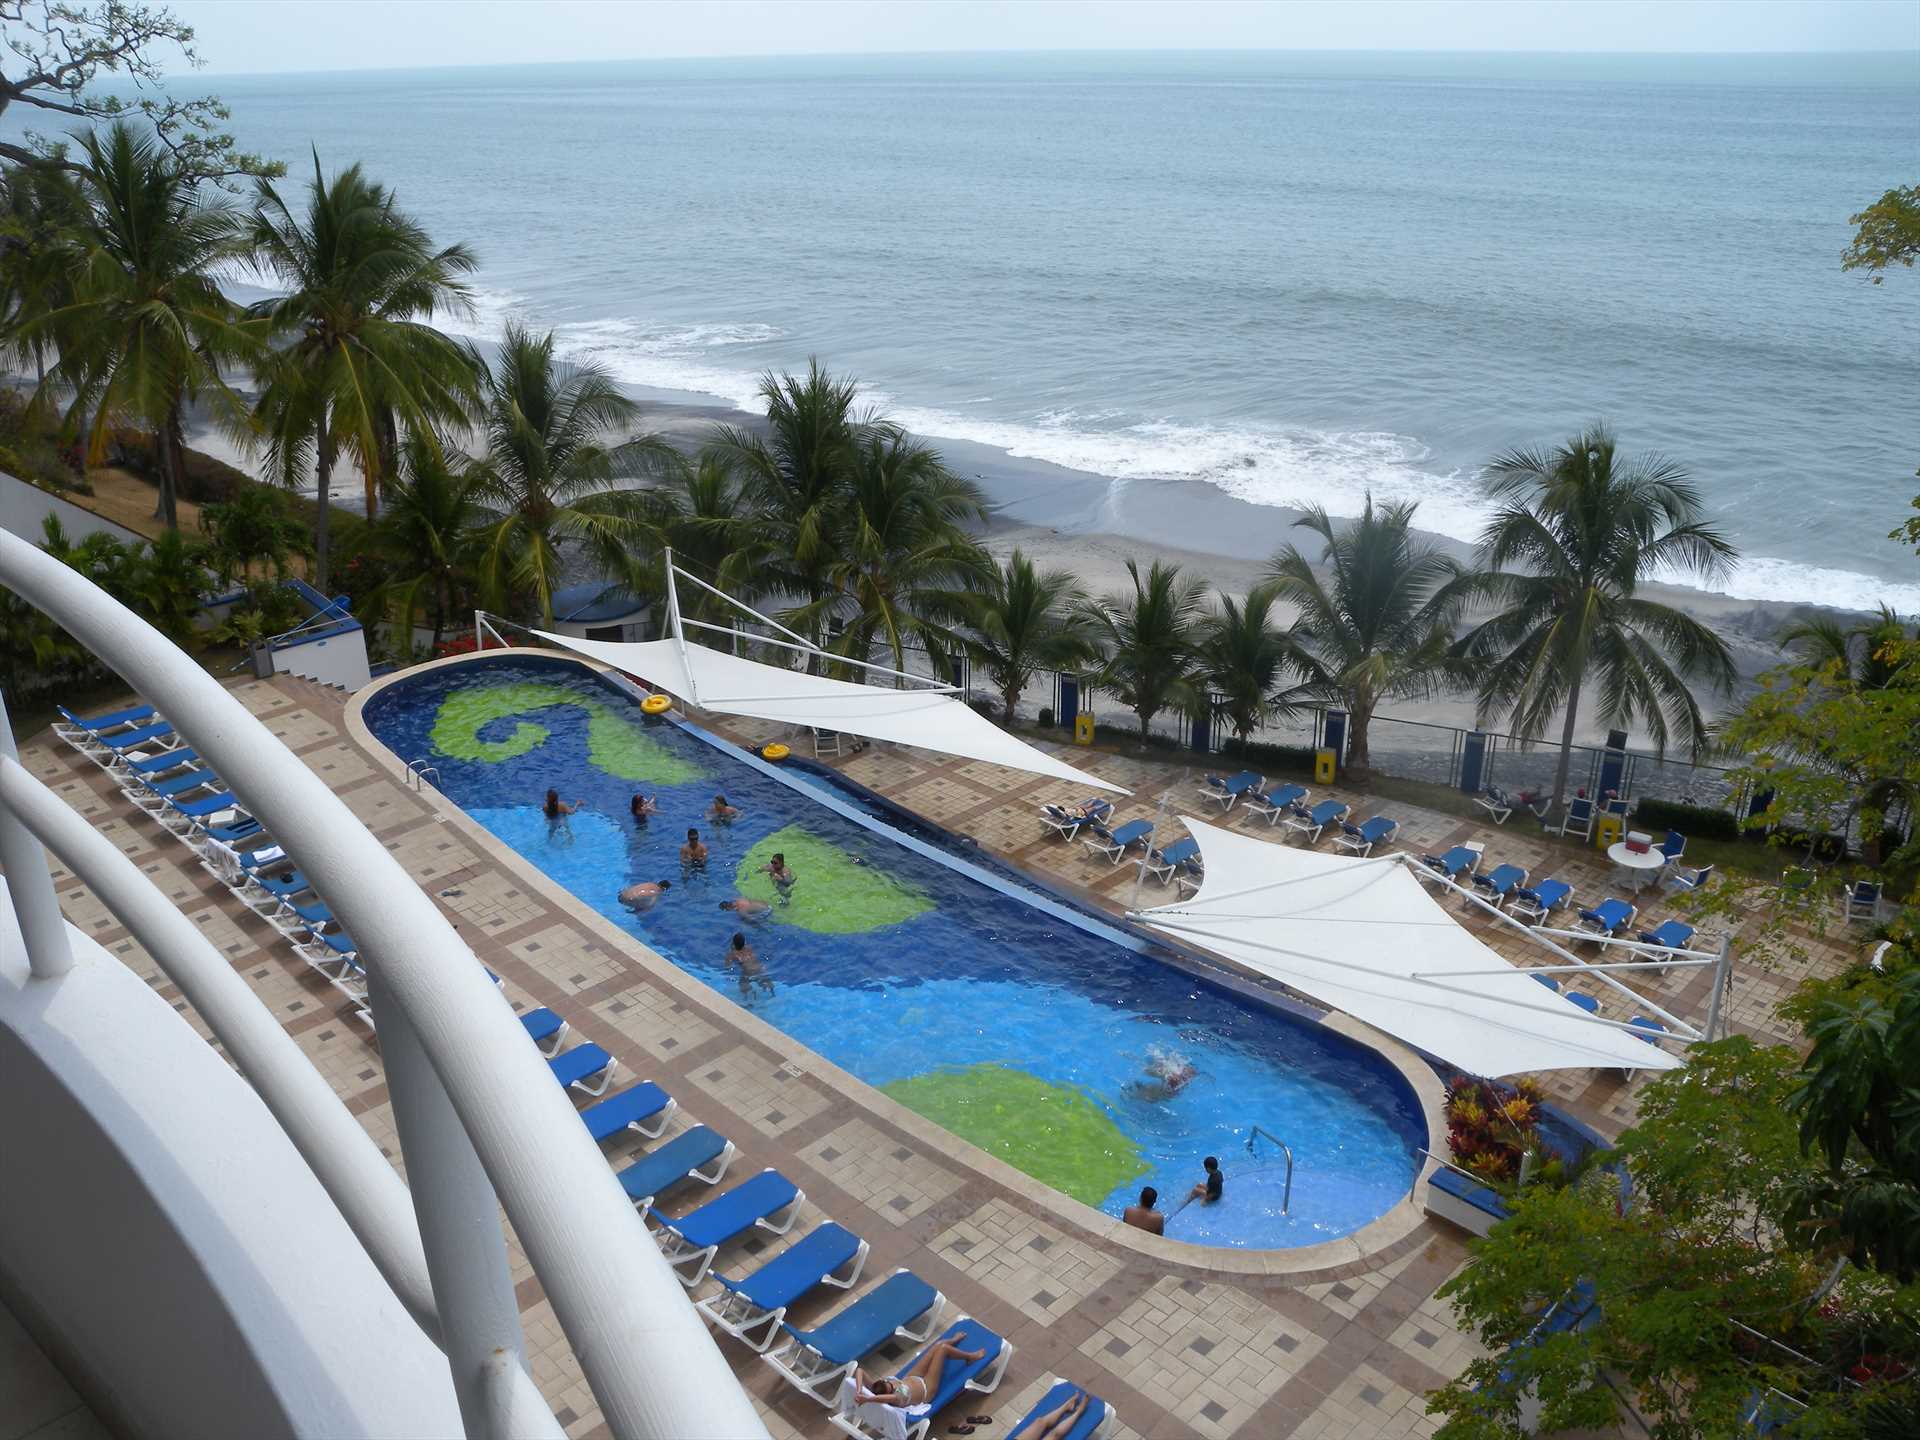 Pool & Beach view from the balcony!